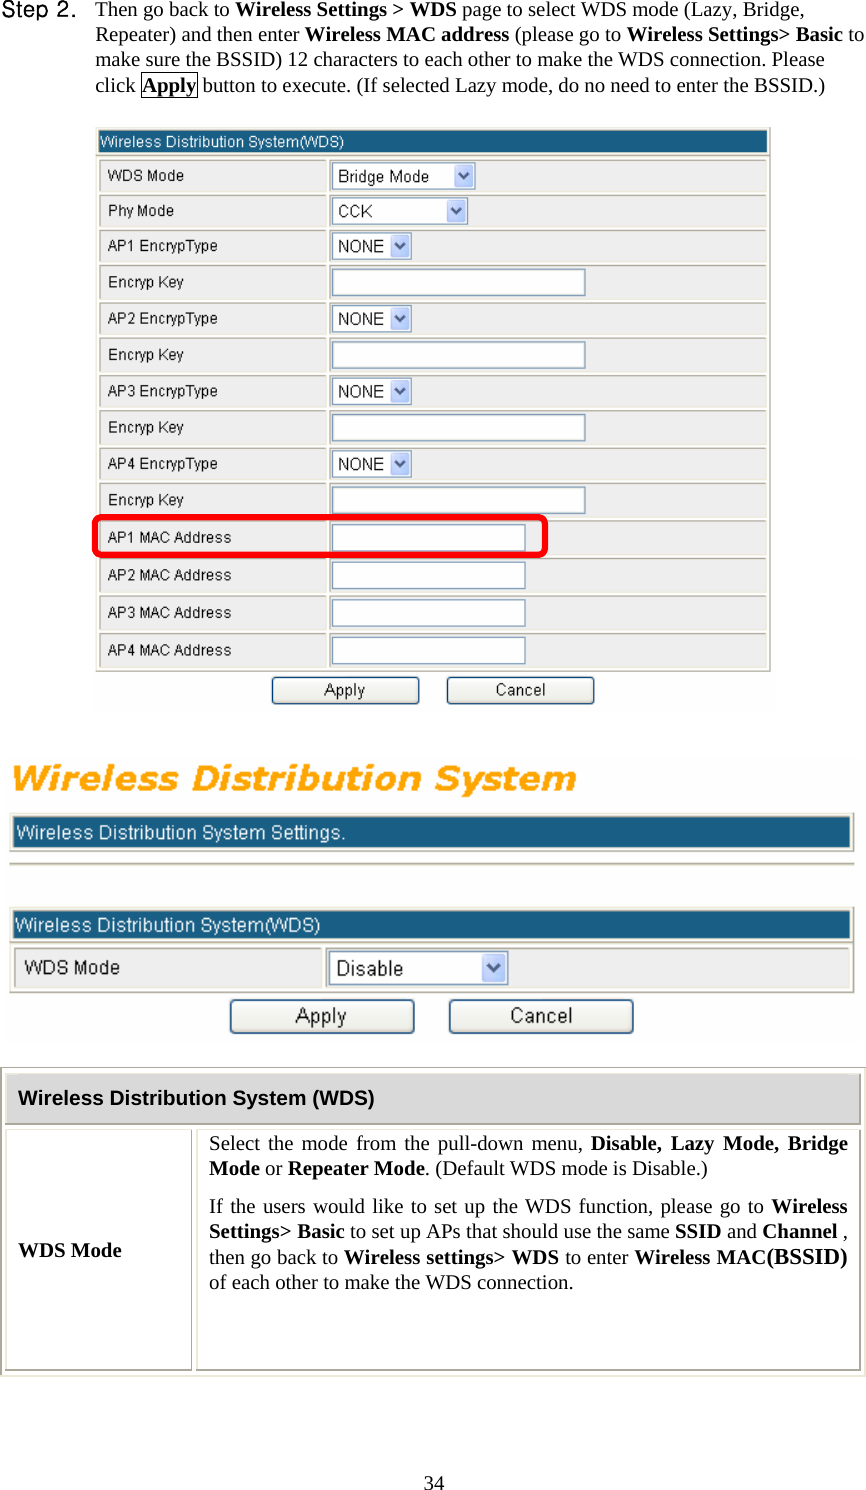   34Step 2. Then go back to Wireless Settings &gt; WDS page to select WDS mode (Lazy, Bridge, Repeater) and then enter Wireless MAC address (please go to Wireless Settings&gt; Basic to make sure the BSSID) 12 characters to each other to make the WDS connection. Please click Apply button to execute. (If selected Lazy mode, do no need to enter the BSSID.)       Wireless Distribution System (WDS) WDS Mode Select the mode from the pull-down menu, Disable, Lazy Mode, Bridge Mode or Repeater Mode. (Default WDS mode is Disable.) If the users would like to set up the WDS function, please go to Wireless Settings&gt; Basic to set up APs that should use the same SSID and Channel , then go back to Wireless settings&gt; WDS to enter Wireless MAC(BSSID) of each other to make the WDS connection.    